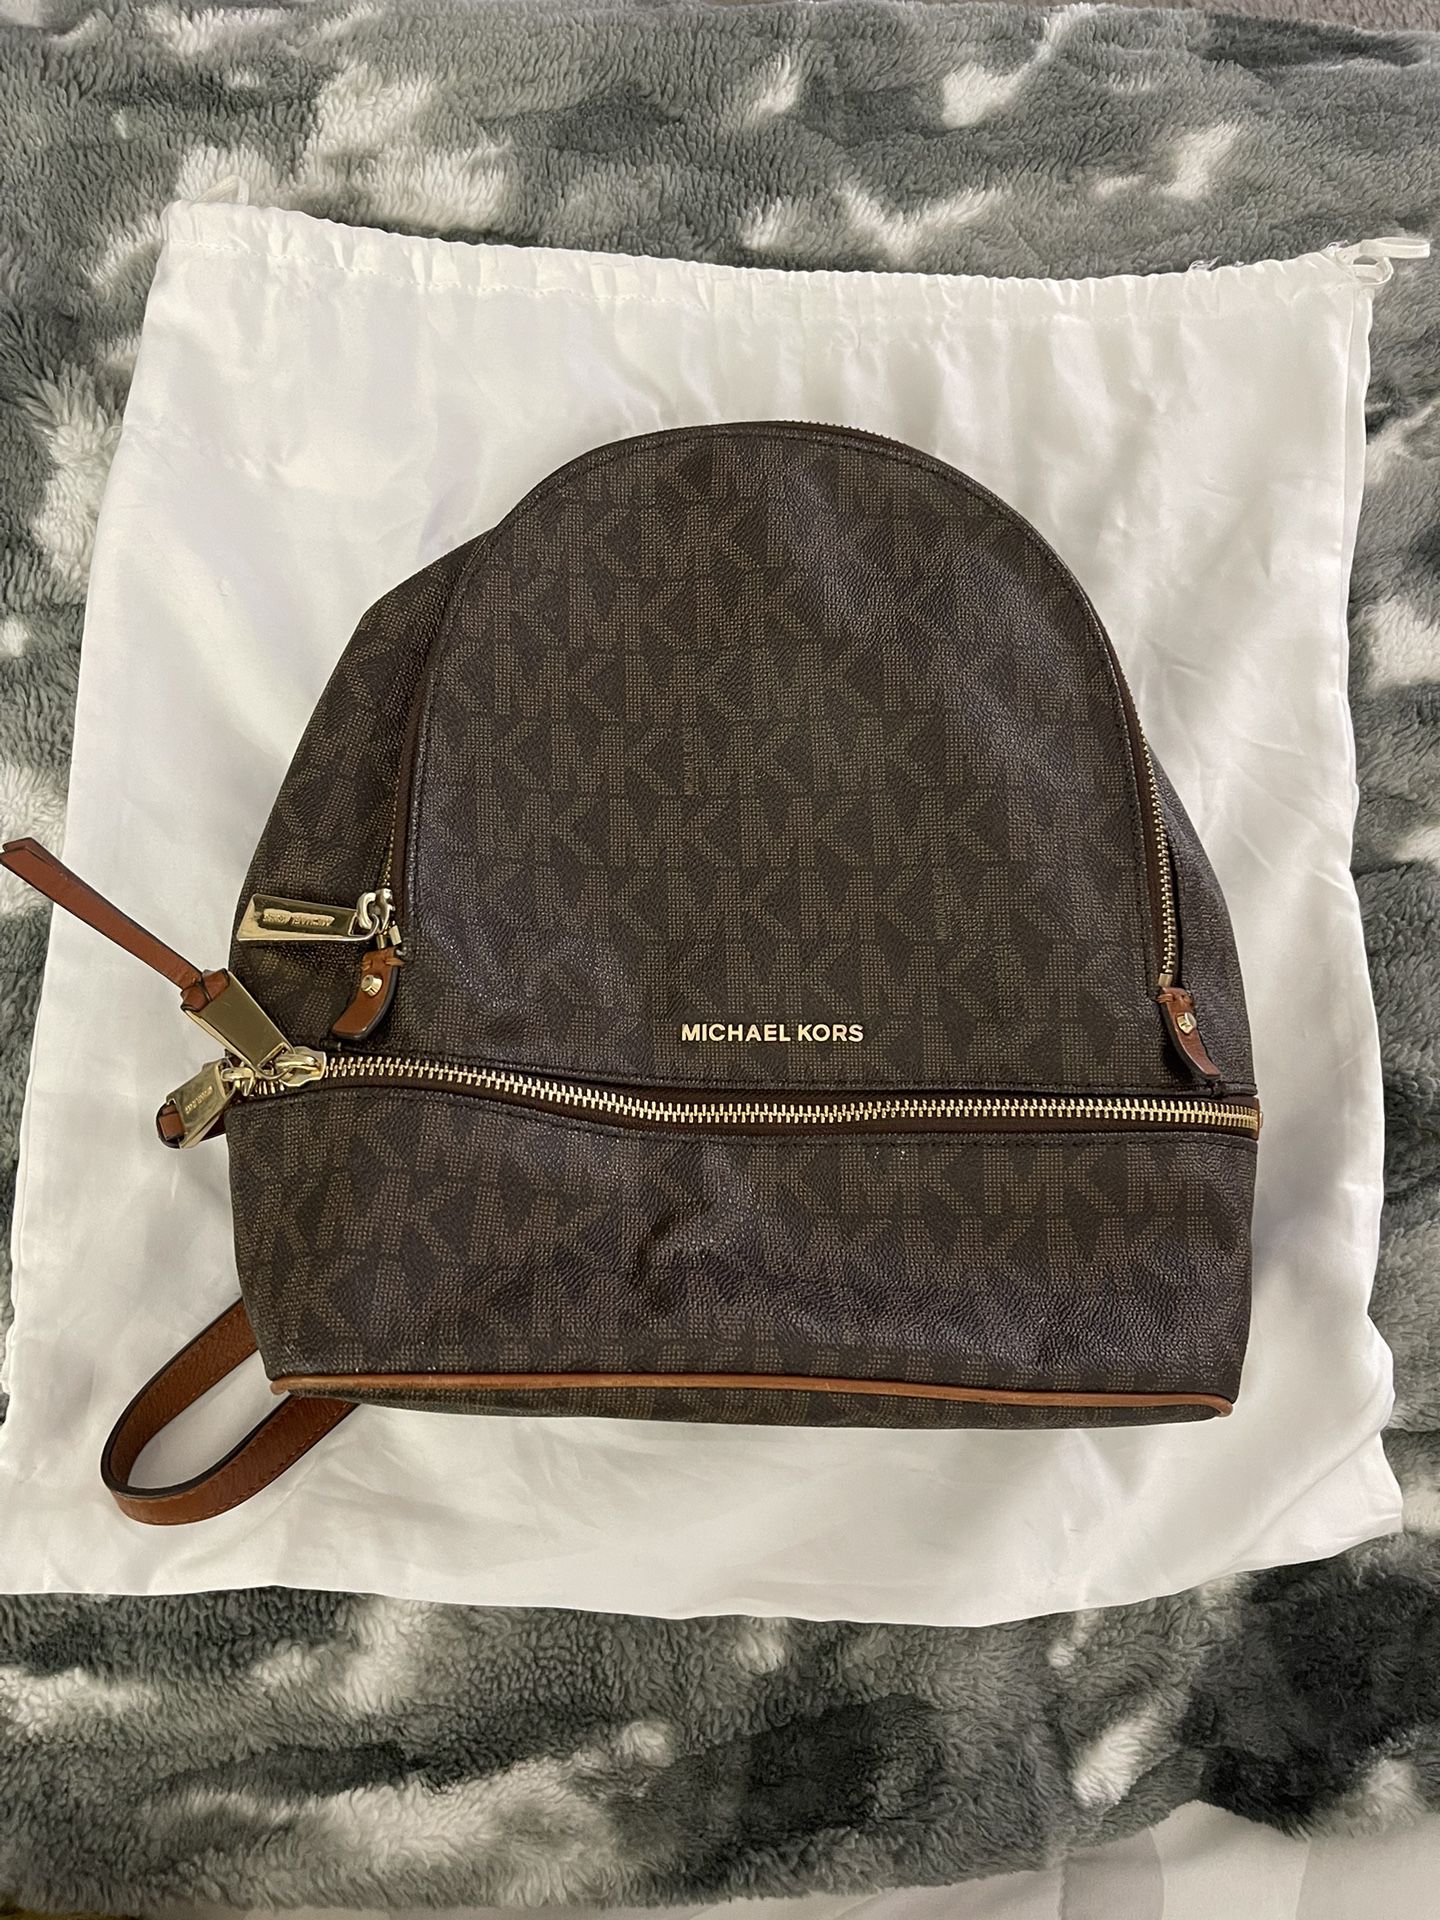 Michael Kors Backpack for Sale in Irving, TX - OfferUp